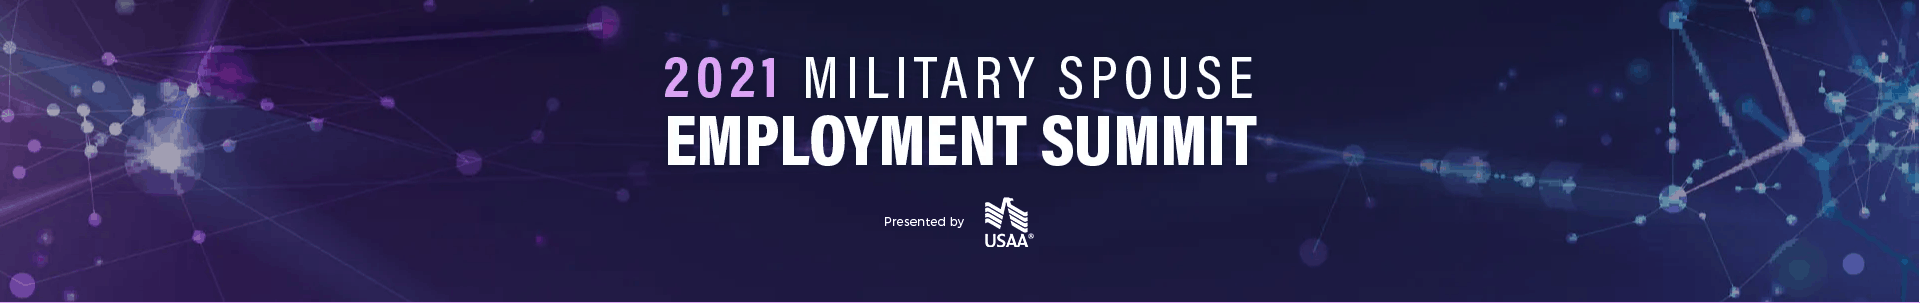 Chenega MIOS is Proud to Participate in the 2021 Military Spouse Employment Summit